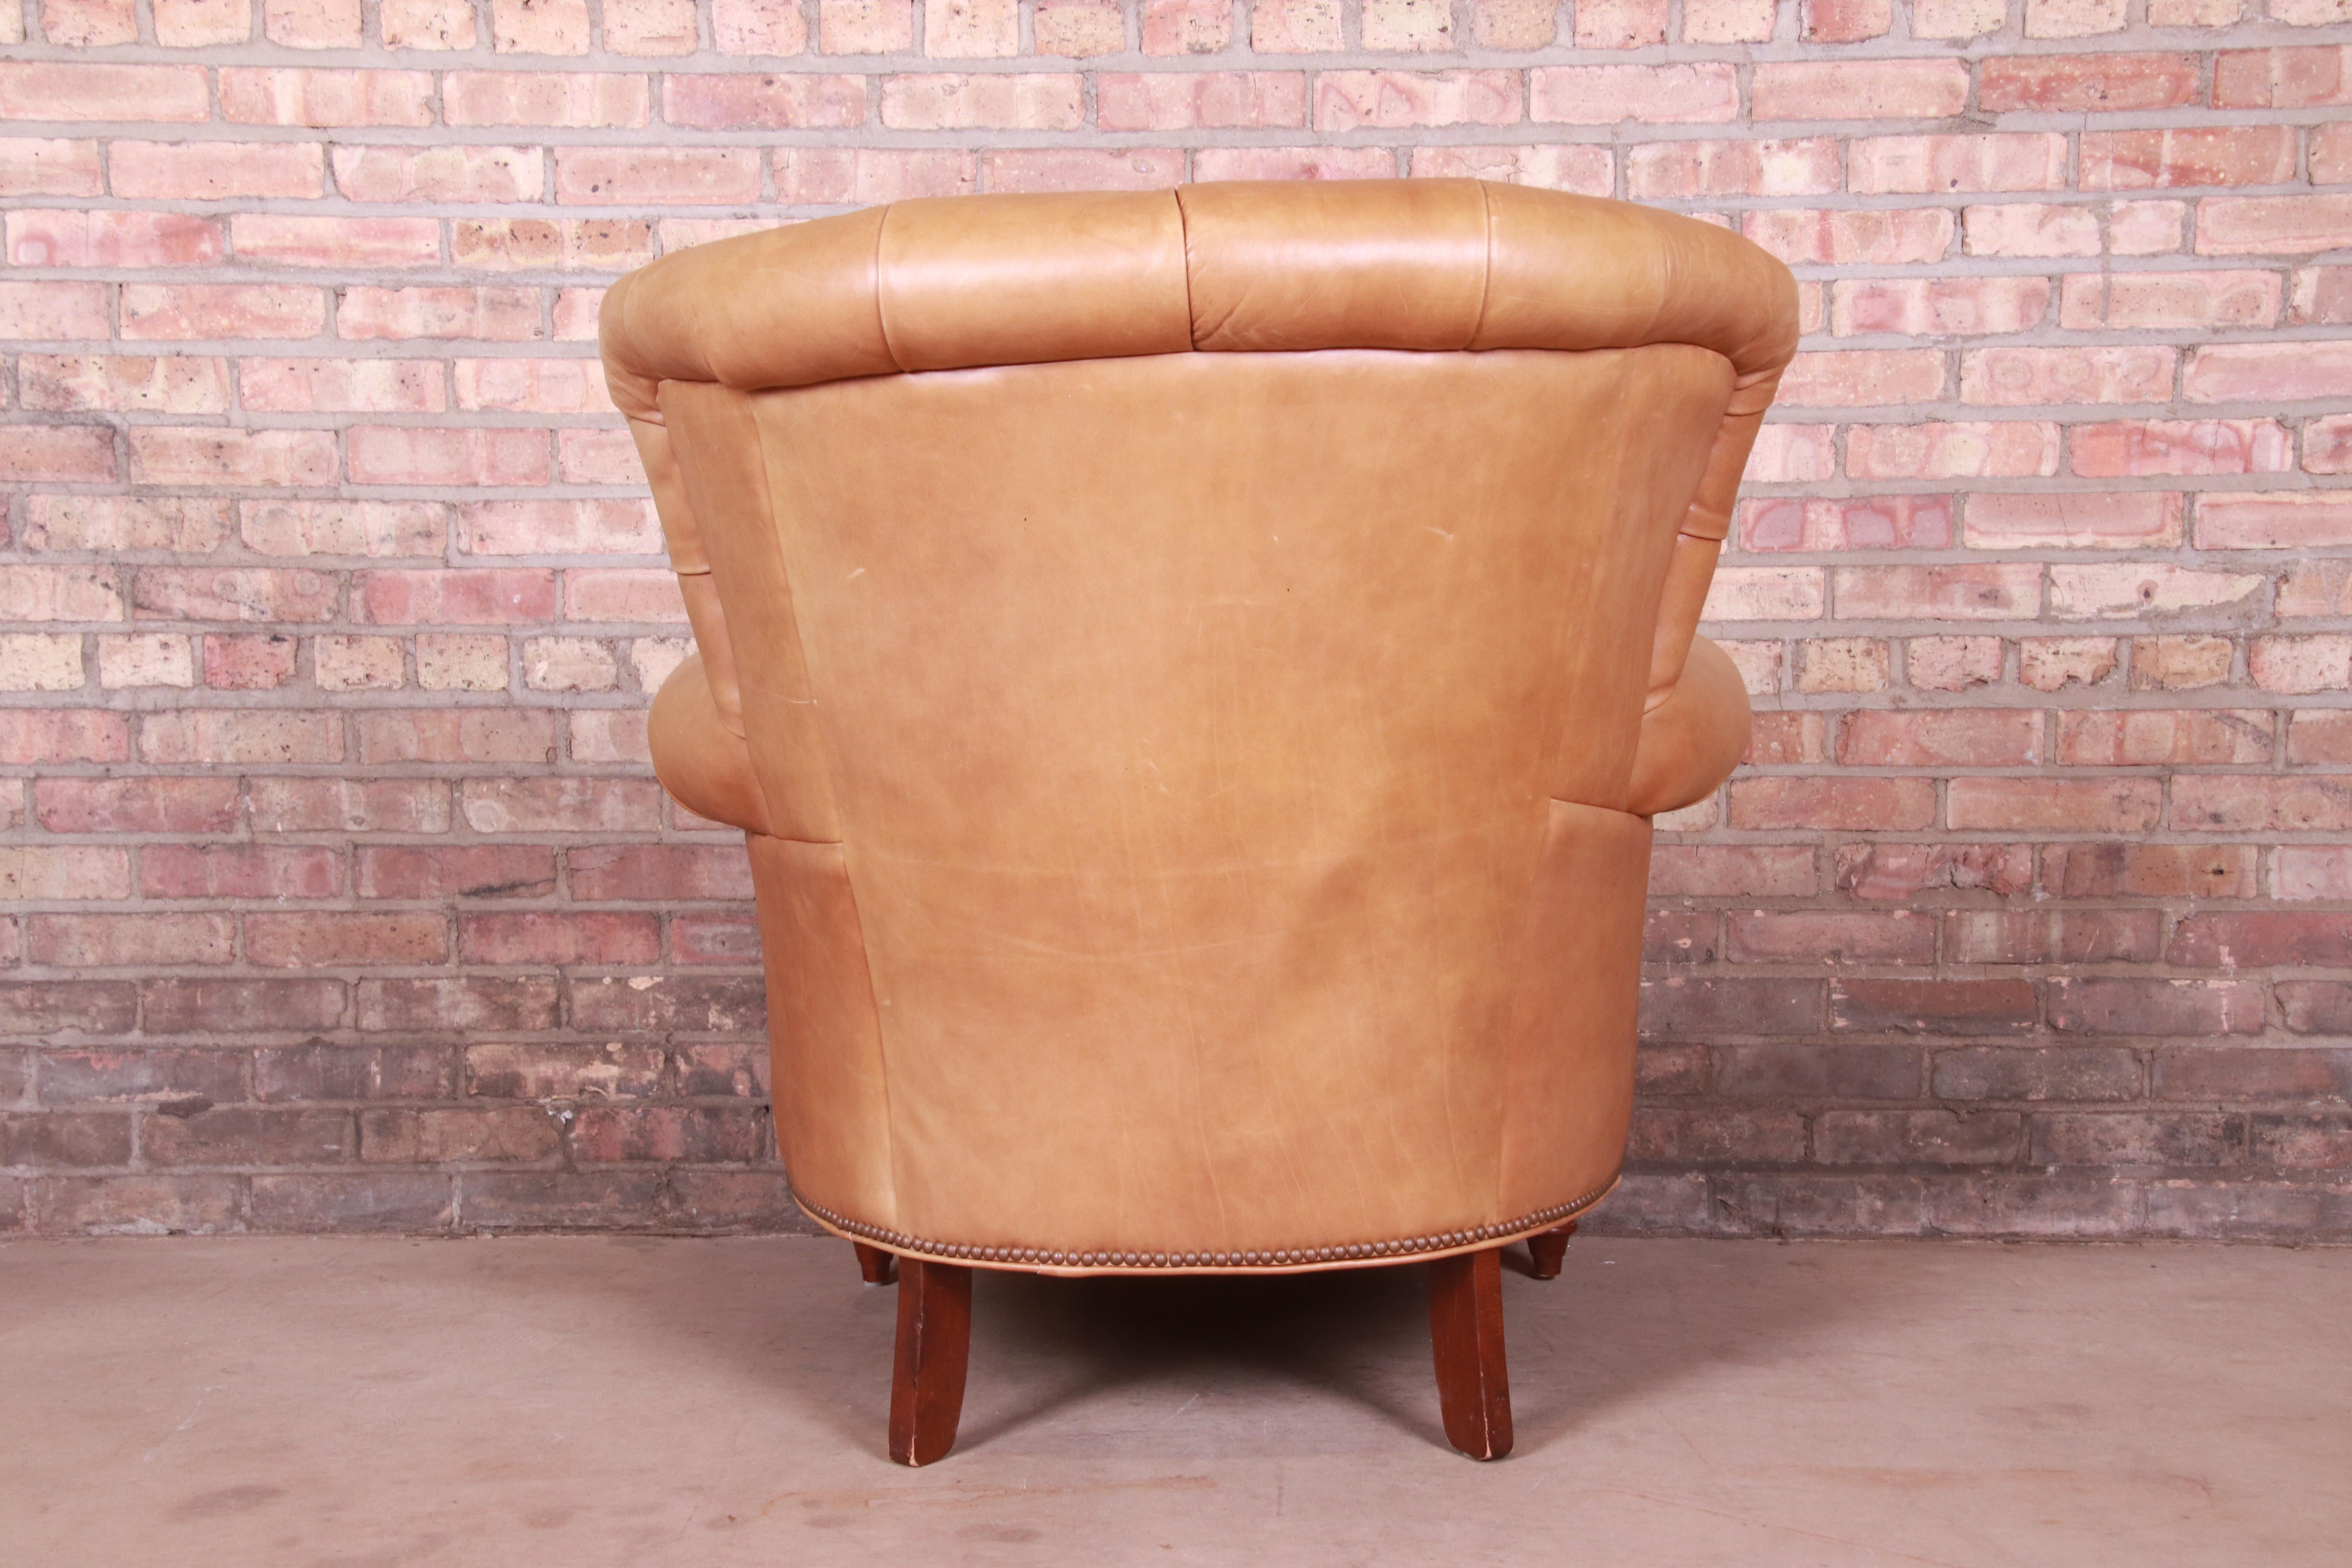 Century Furniture Tufted Leather Chesterfield Lounge Chair 6